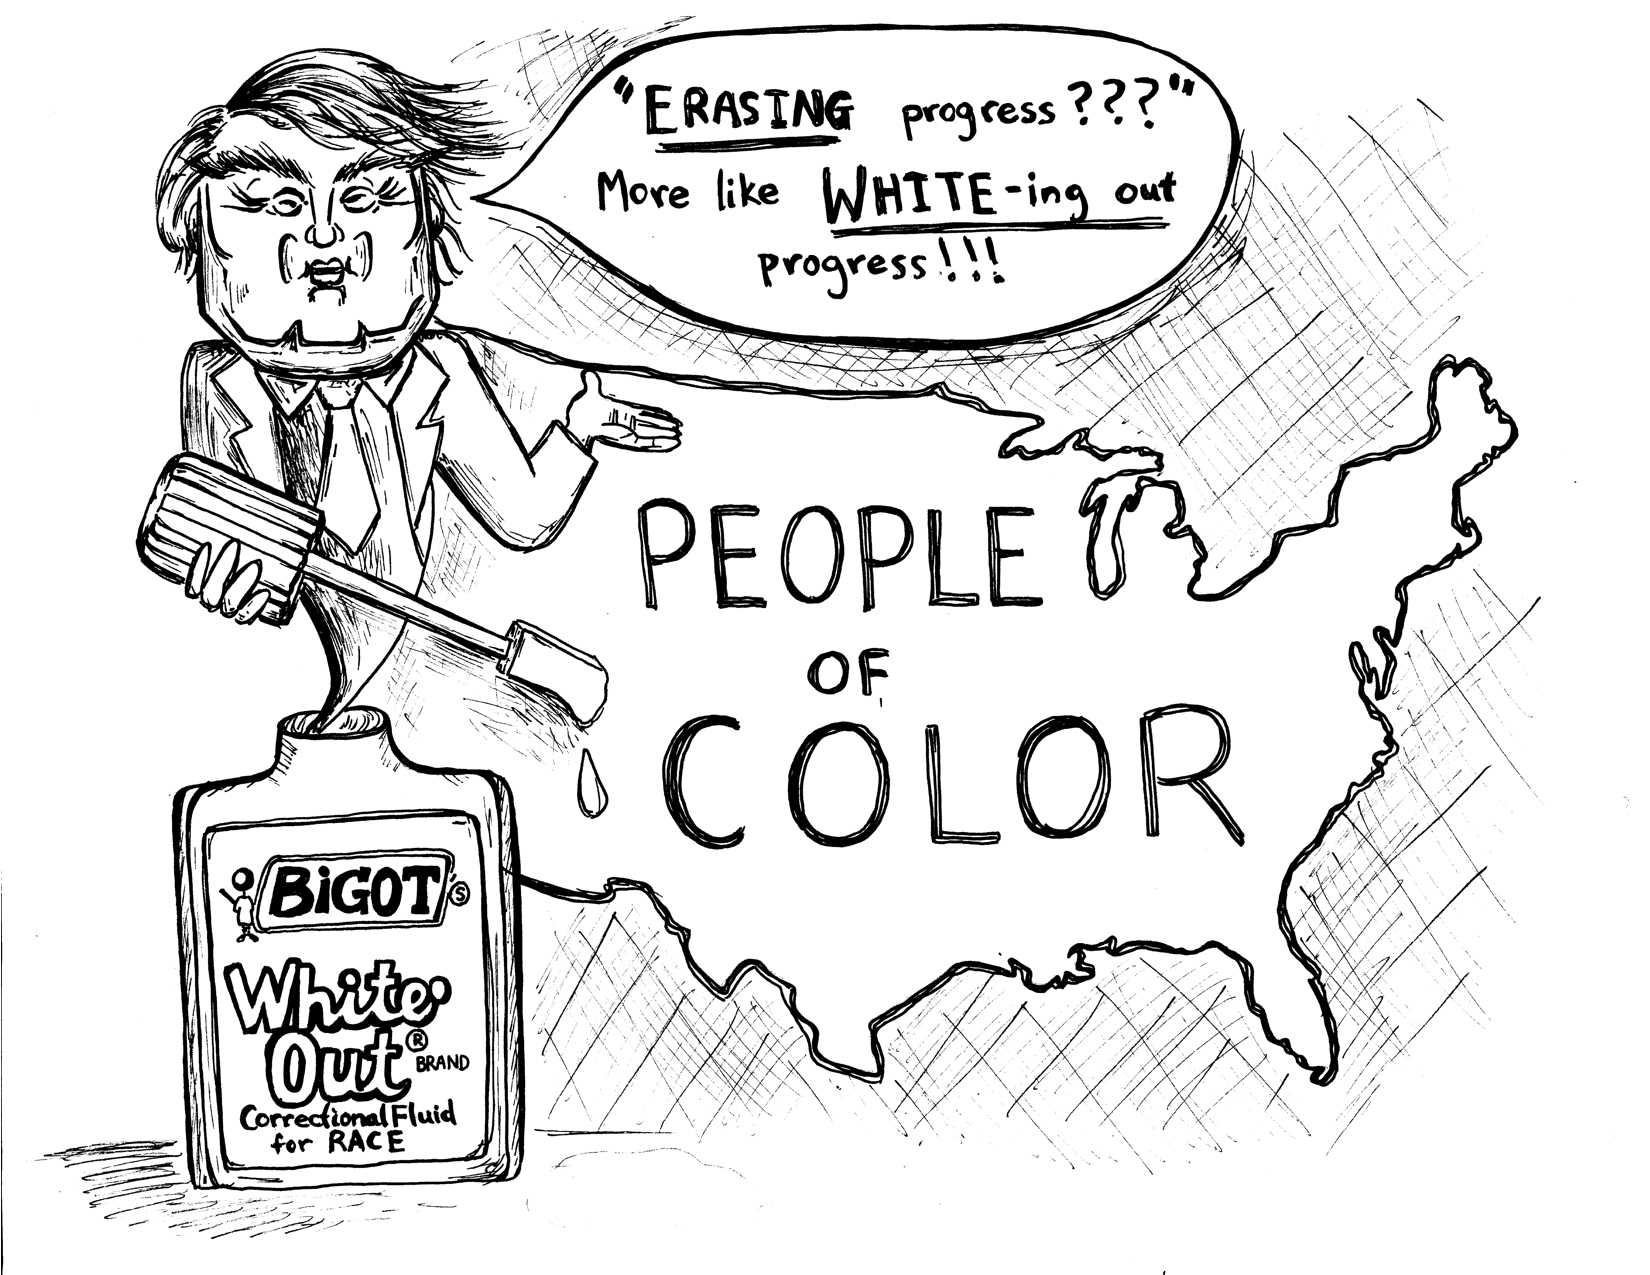 Political cartoon by Rachel Chang / The Foothill Dragon Press.